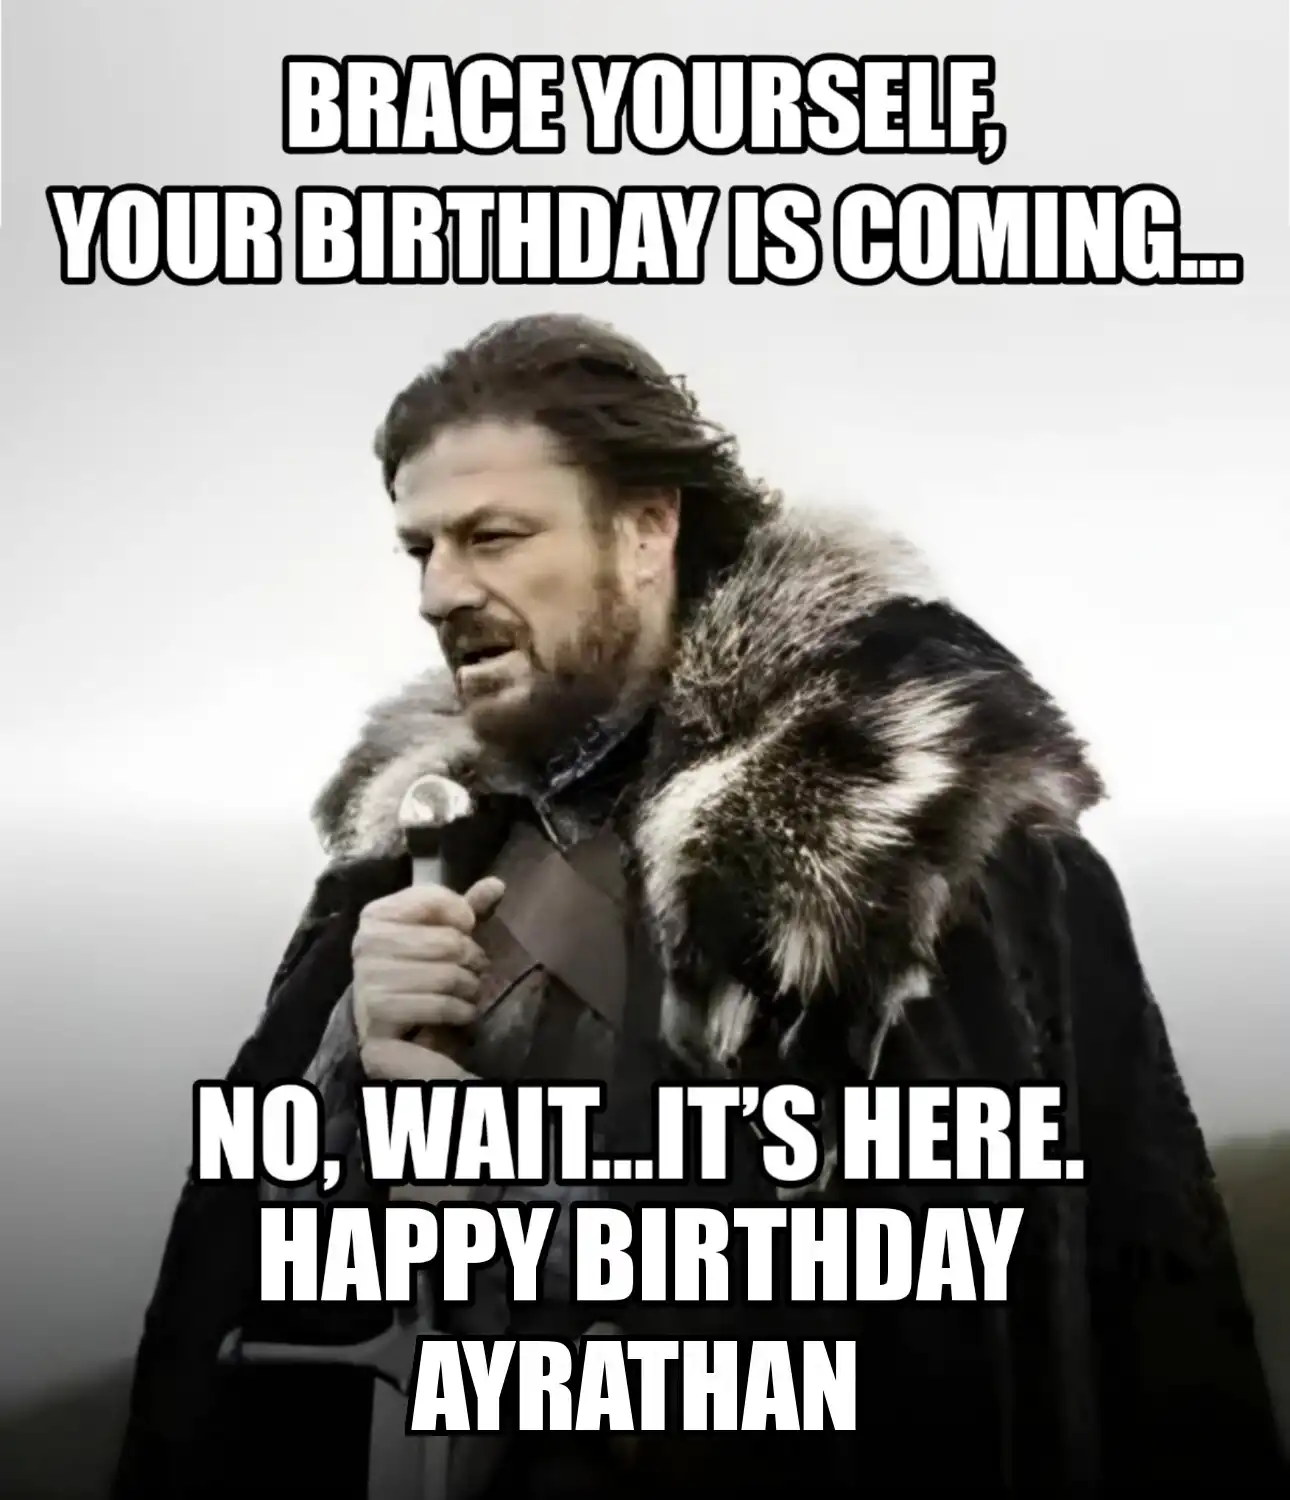 Happy Birthday Ayrathan Brace Yourself Your Birthday Is Coming Meme